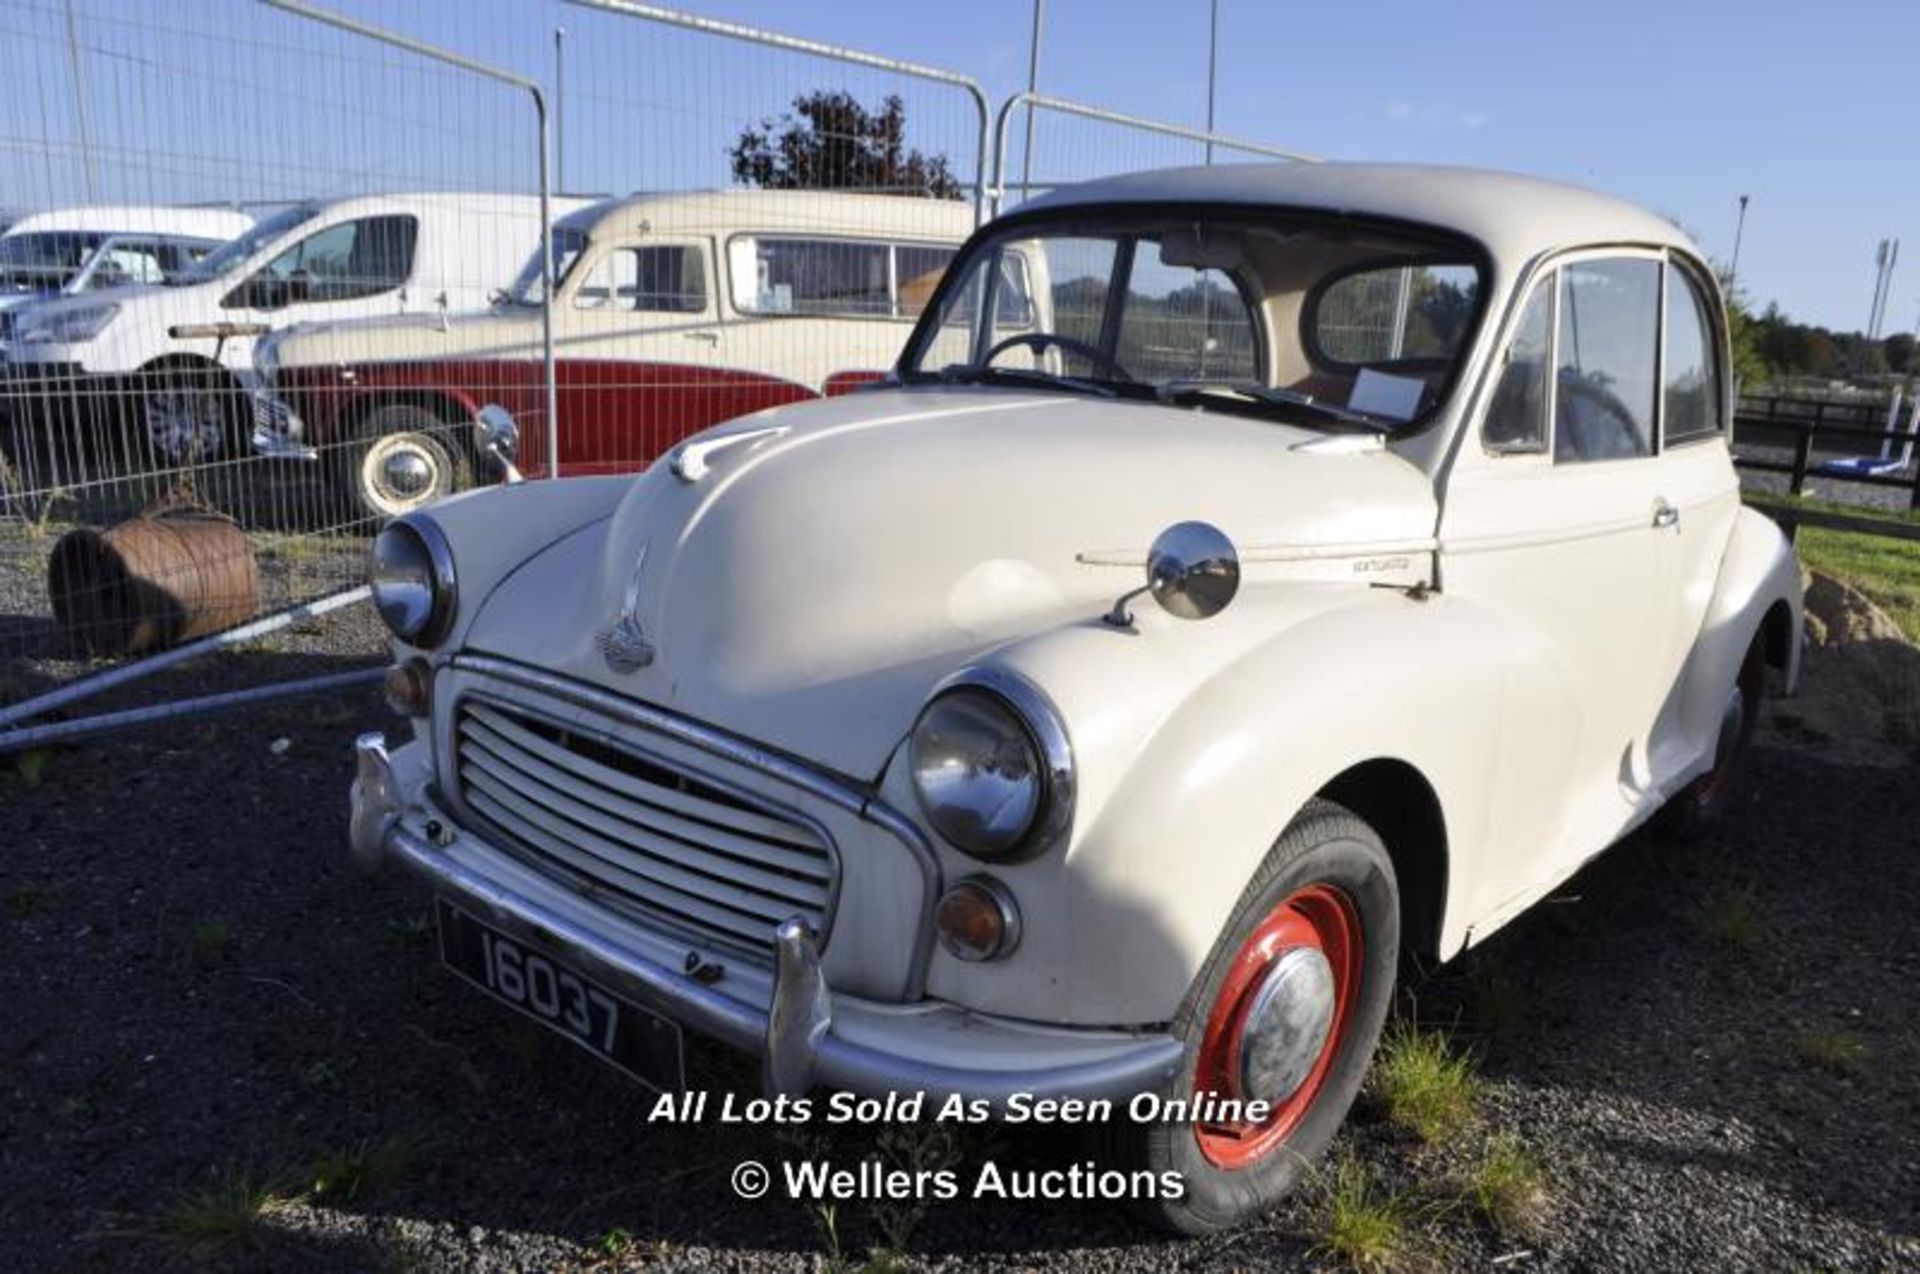 MORRIS MINOR 1000, REG: 16037 (GUERNSEY IMPORT - WILL REQUIRE RE-REGISTRATION IN ENGLAND),